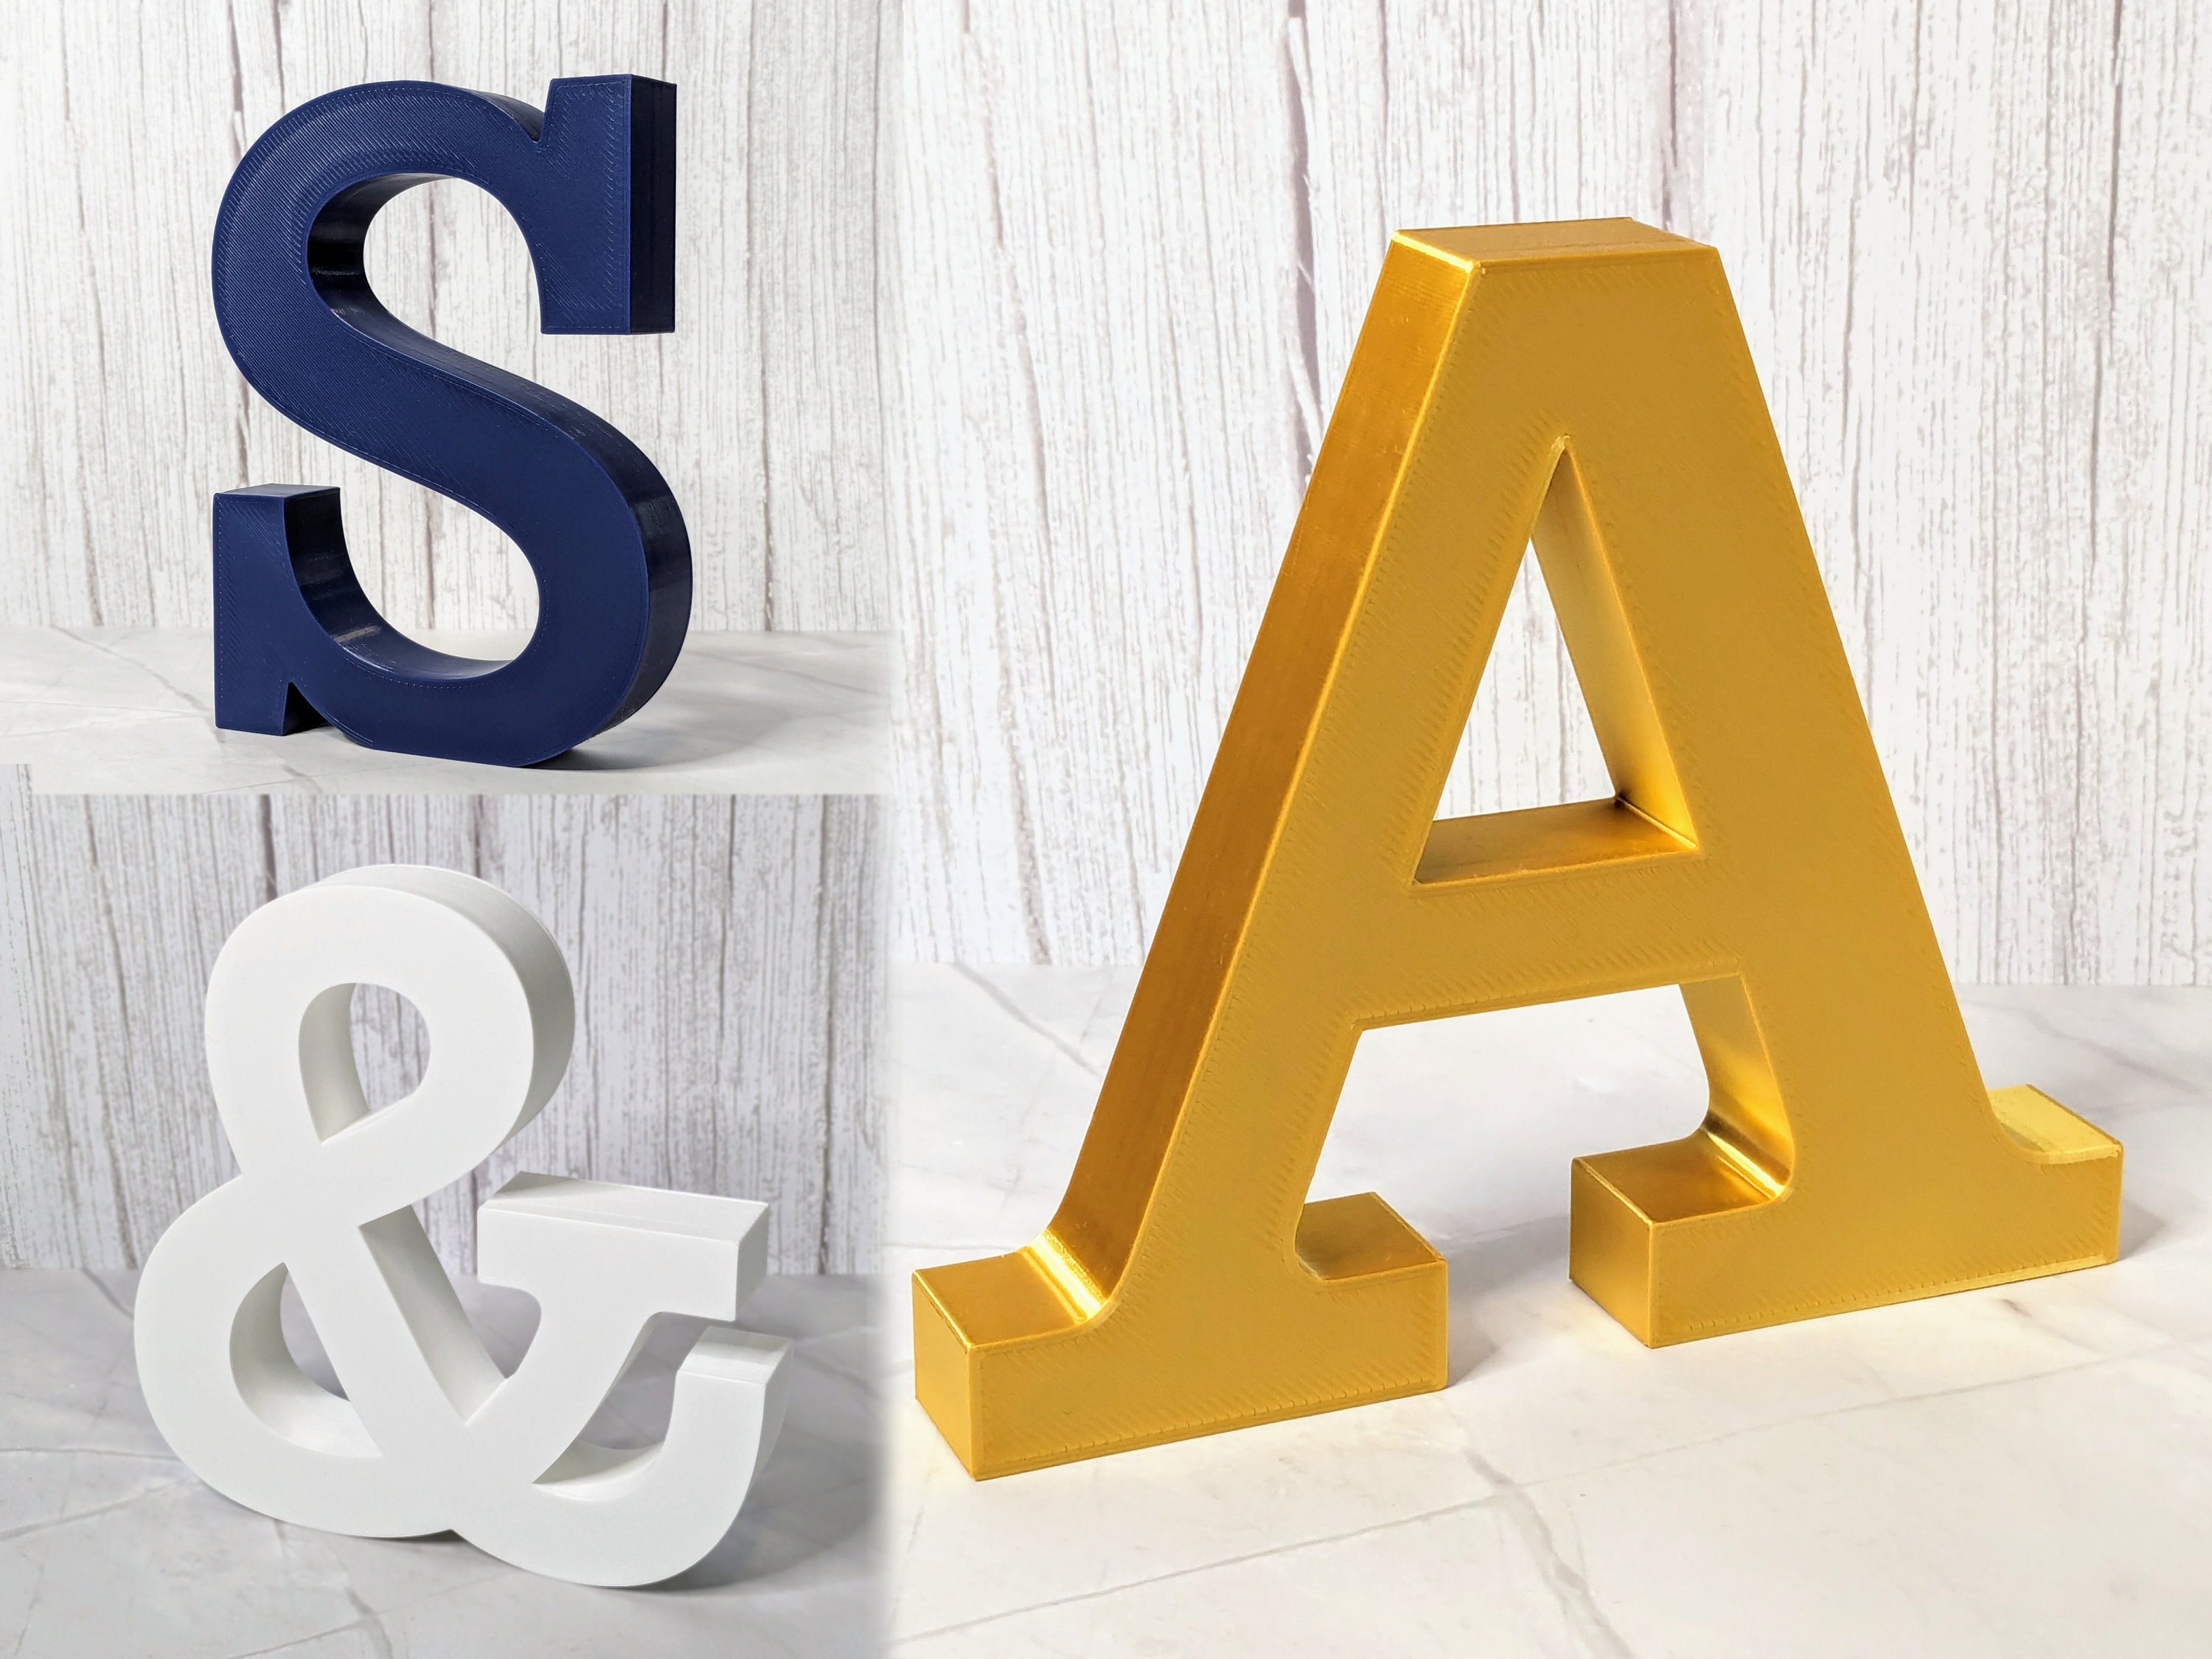 Pioneer 3D Gold Letter Stickers 3DLG – Good's Store Online